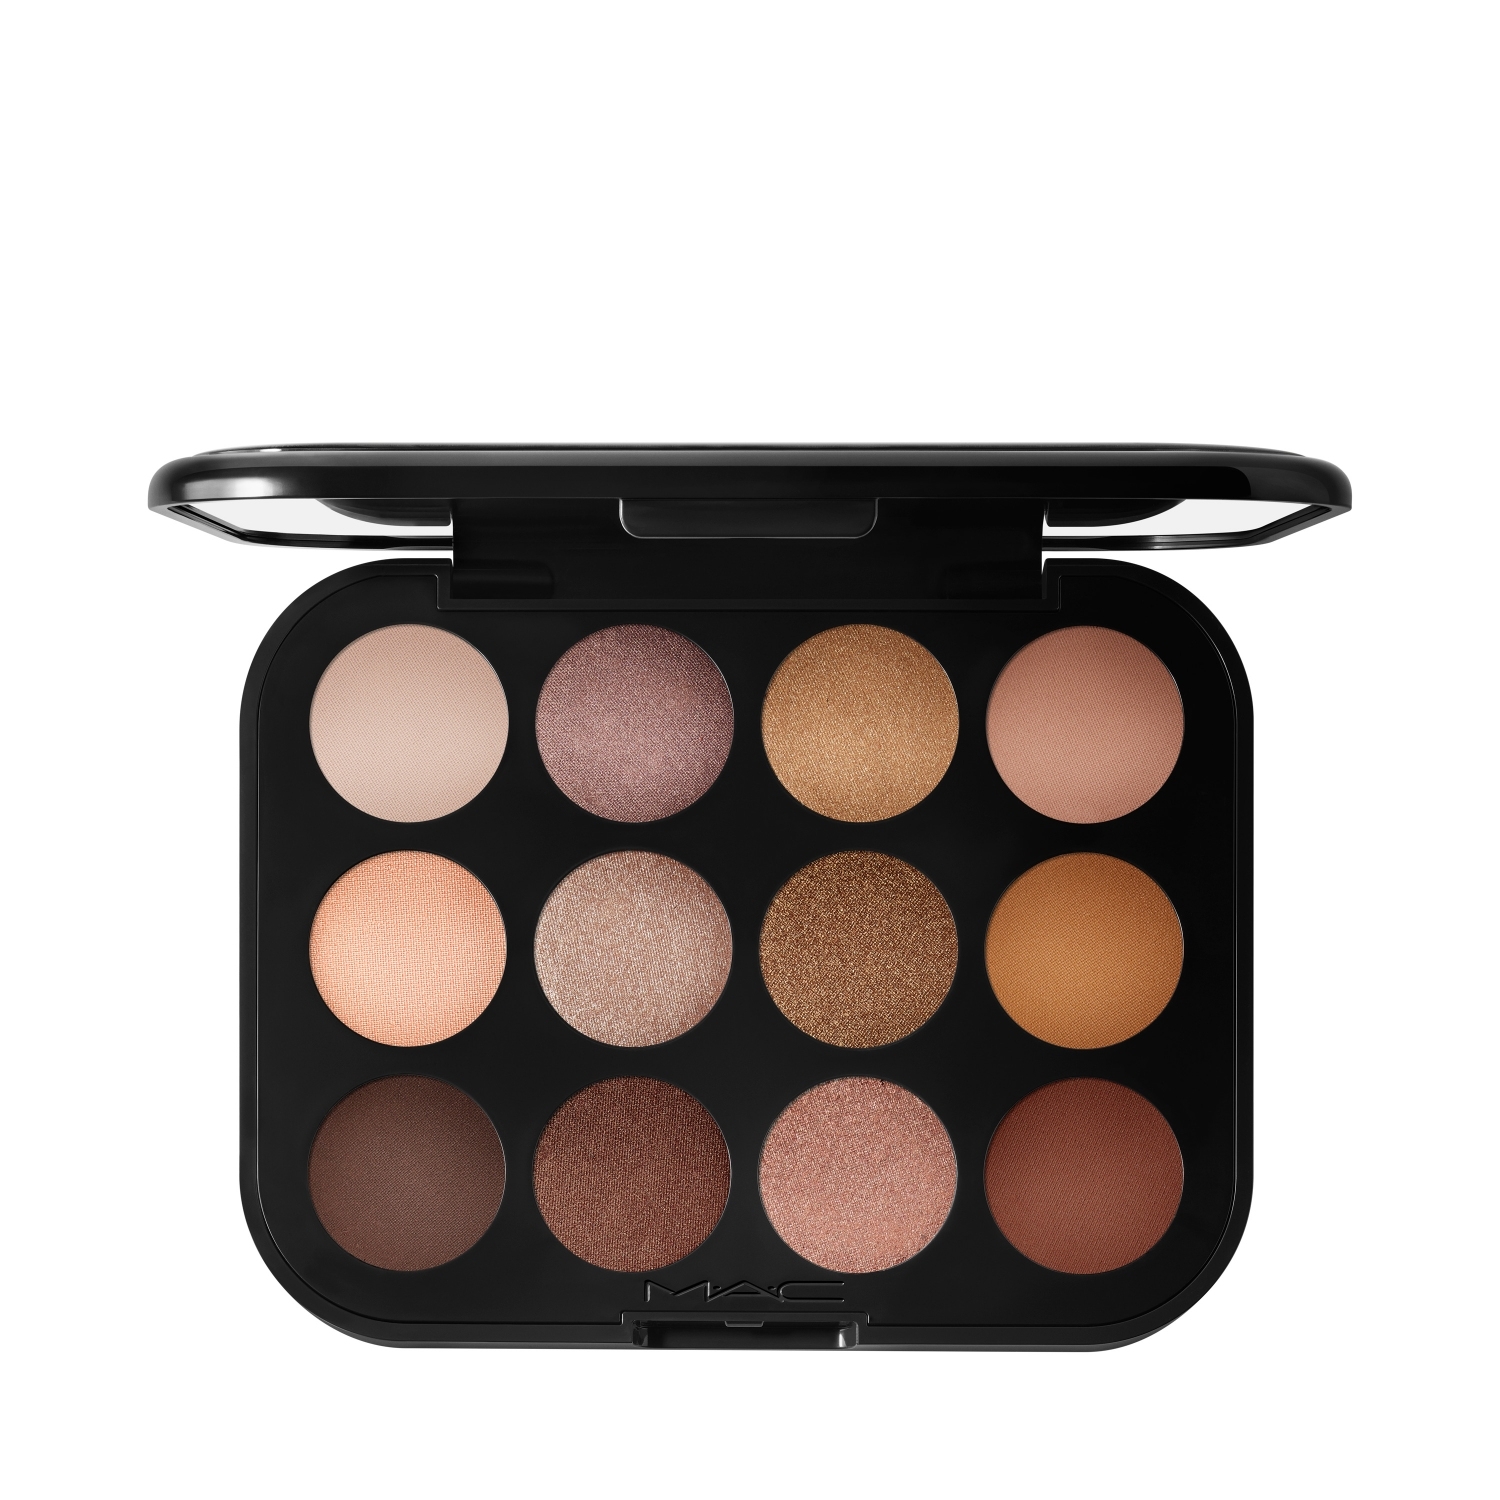 M.A.C | M.A.C Connect In Colour X12 Eye Shadow Palette - Unfiltered Nudes (17.2g)